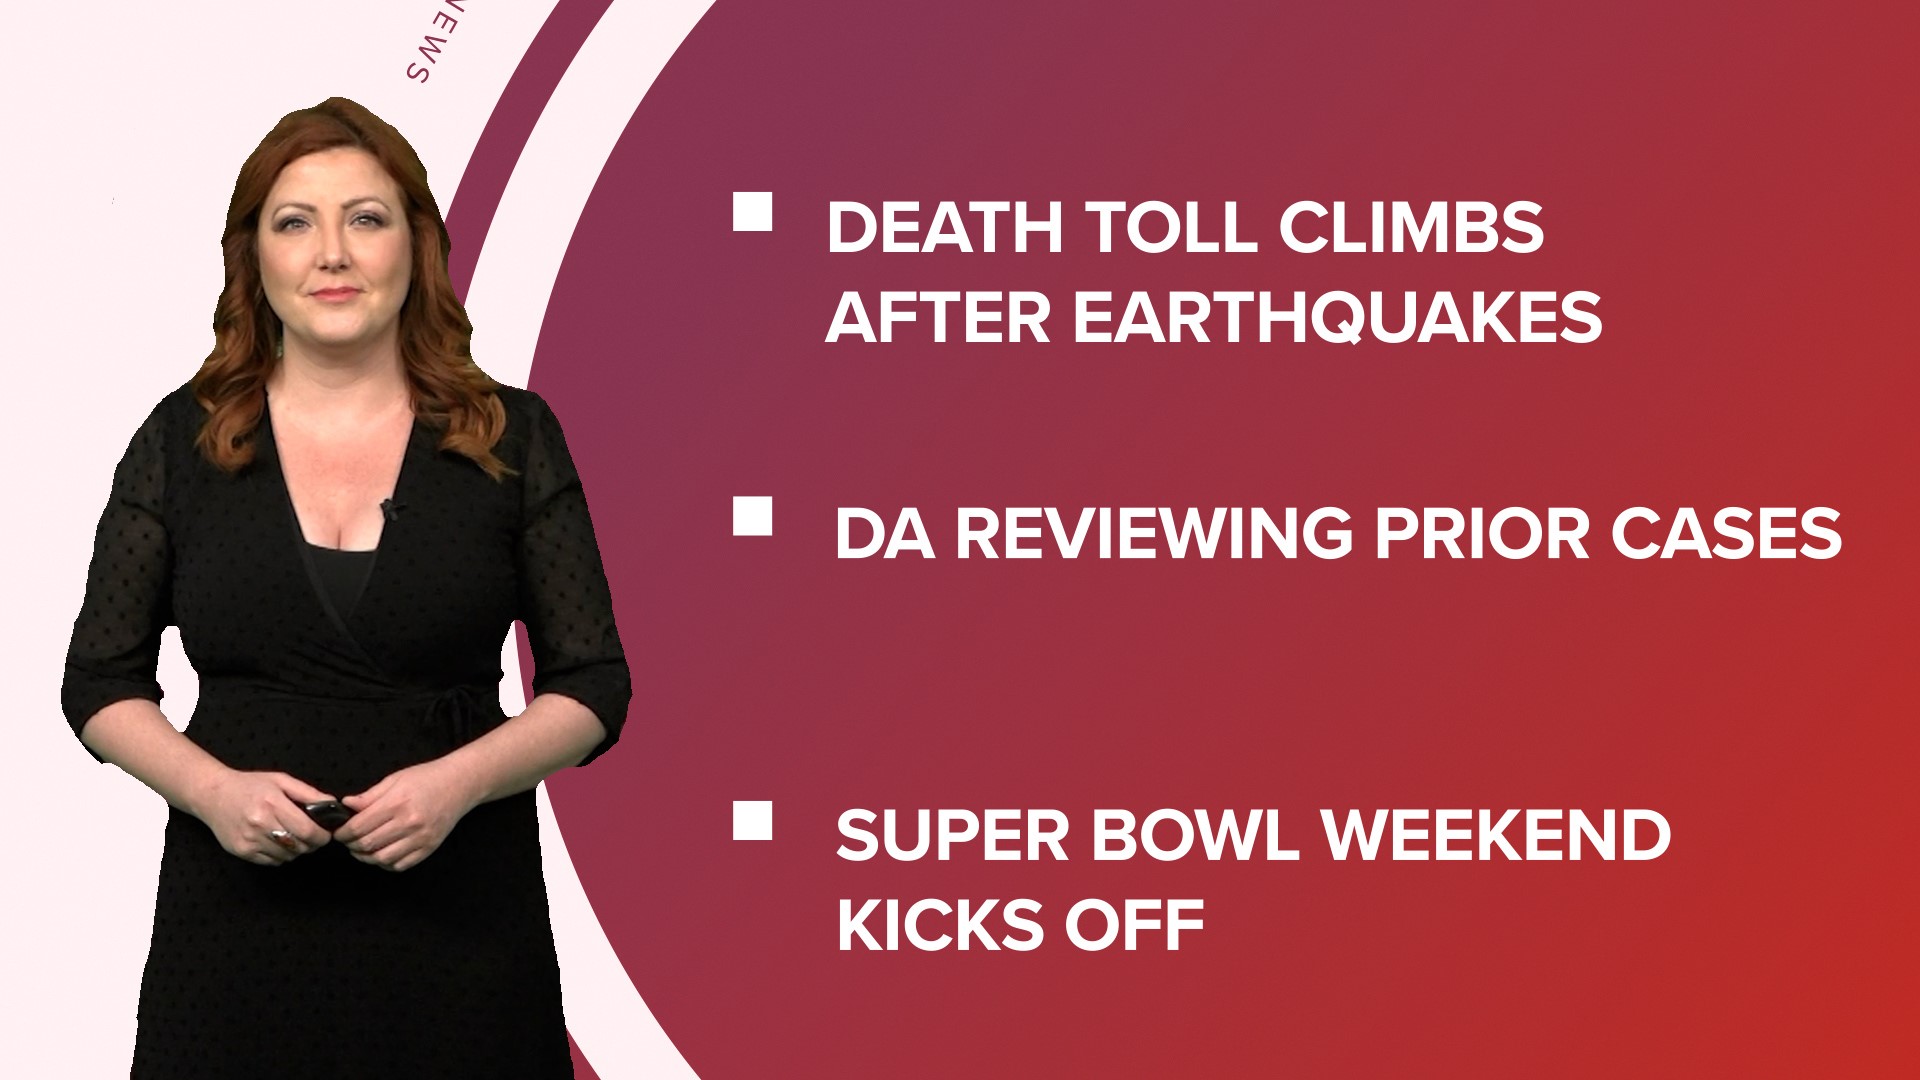 A look at what is happening in the news from the rising death toll from Turkey-Syria quakes and an update on Tyre Nichols' death to Super Bowl weekend kicks off.